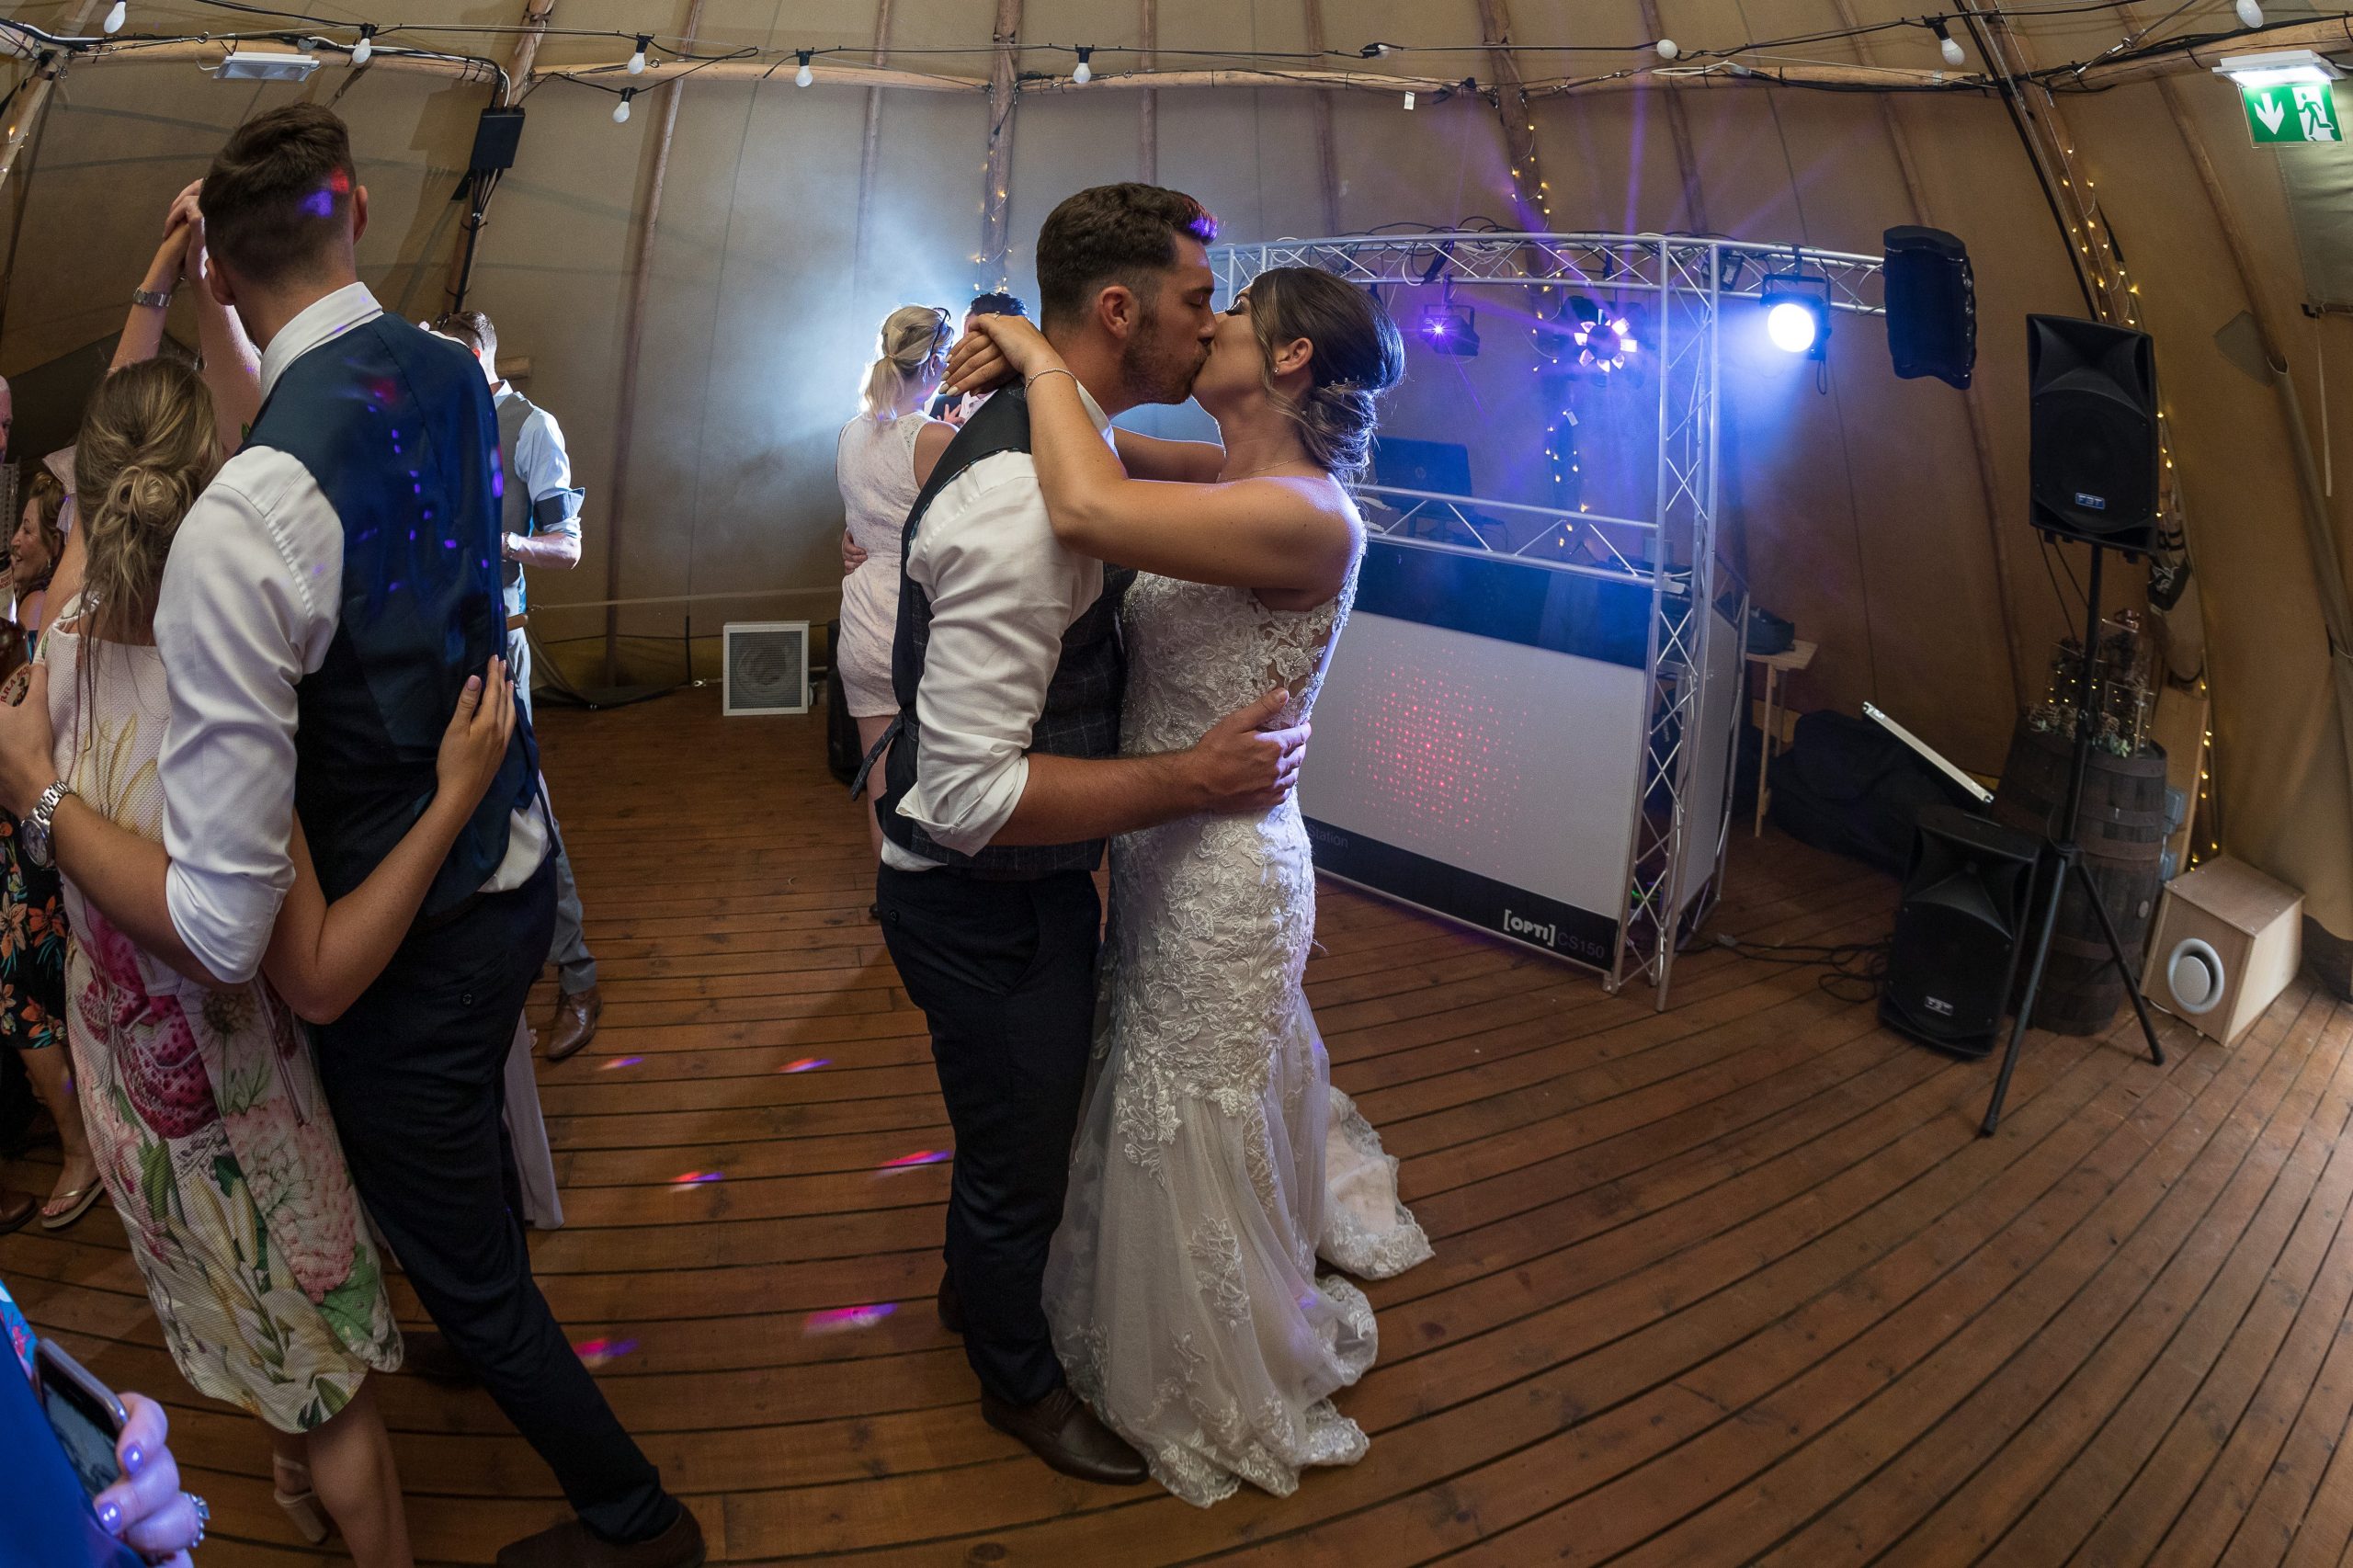 Broghan-and-Shane-dancing-pic-high-res-scaled